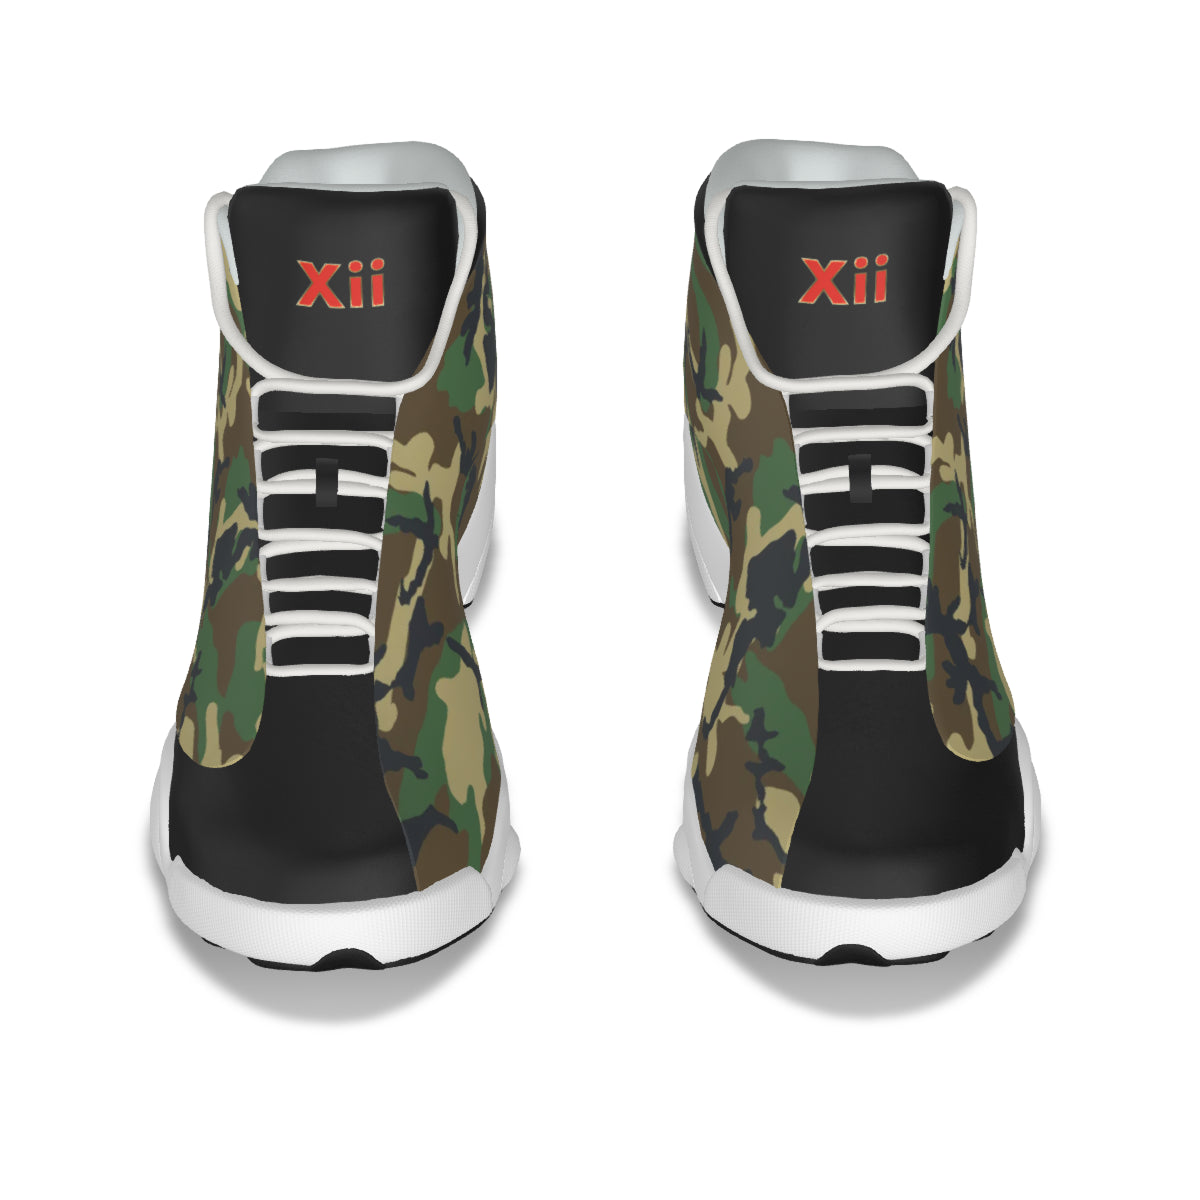 Xcarii Xii - Rim Poster Men's Basketball Shoes